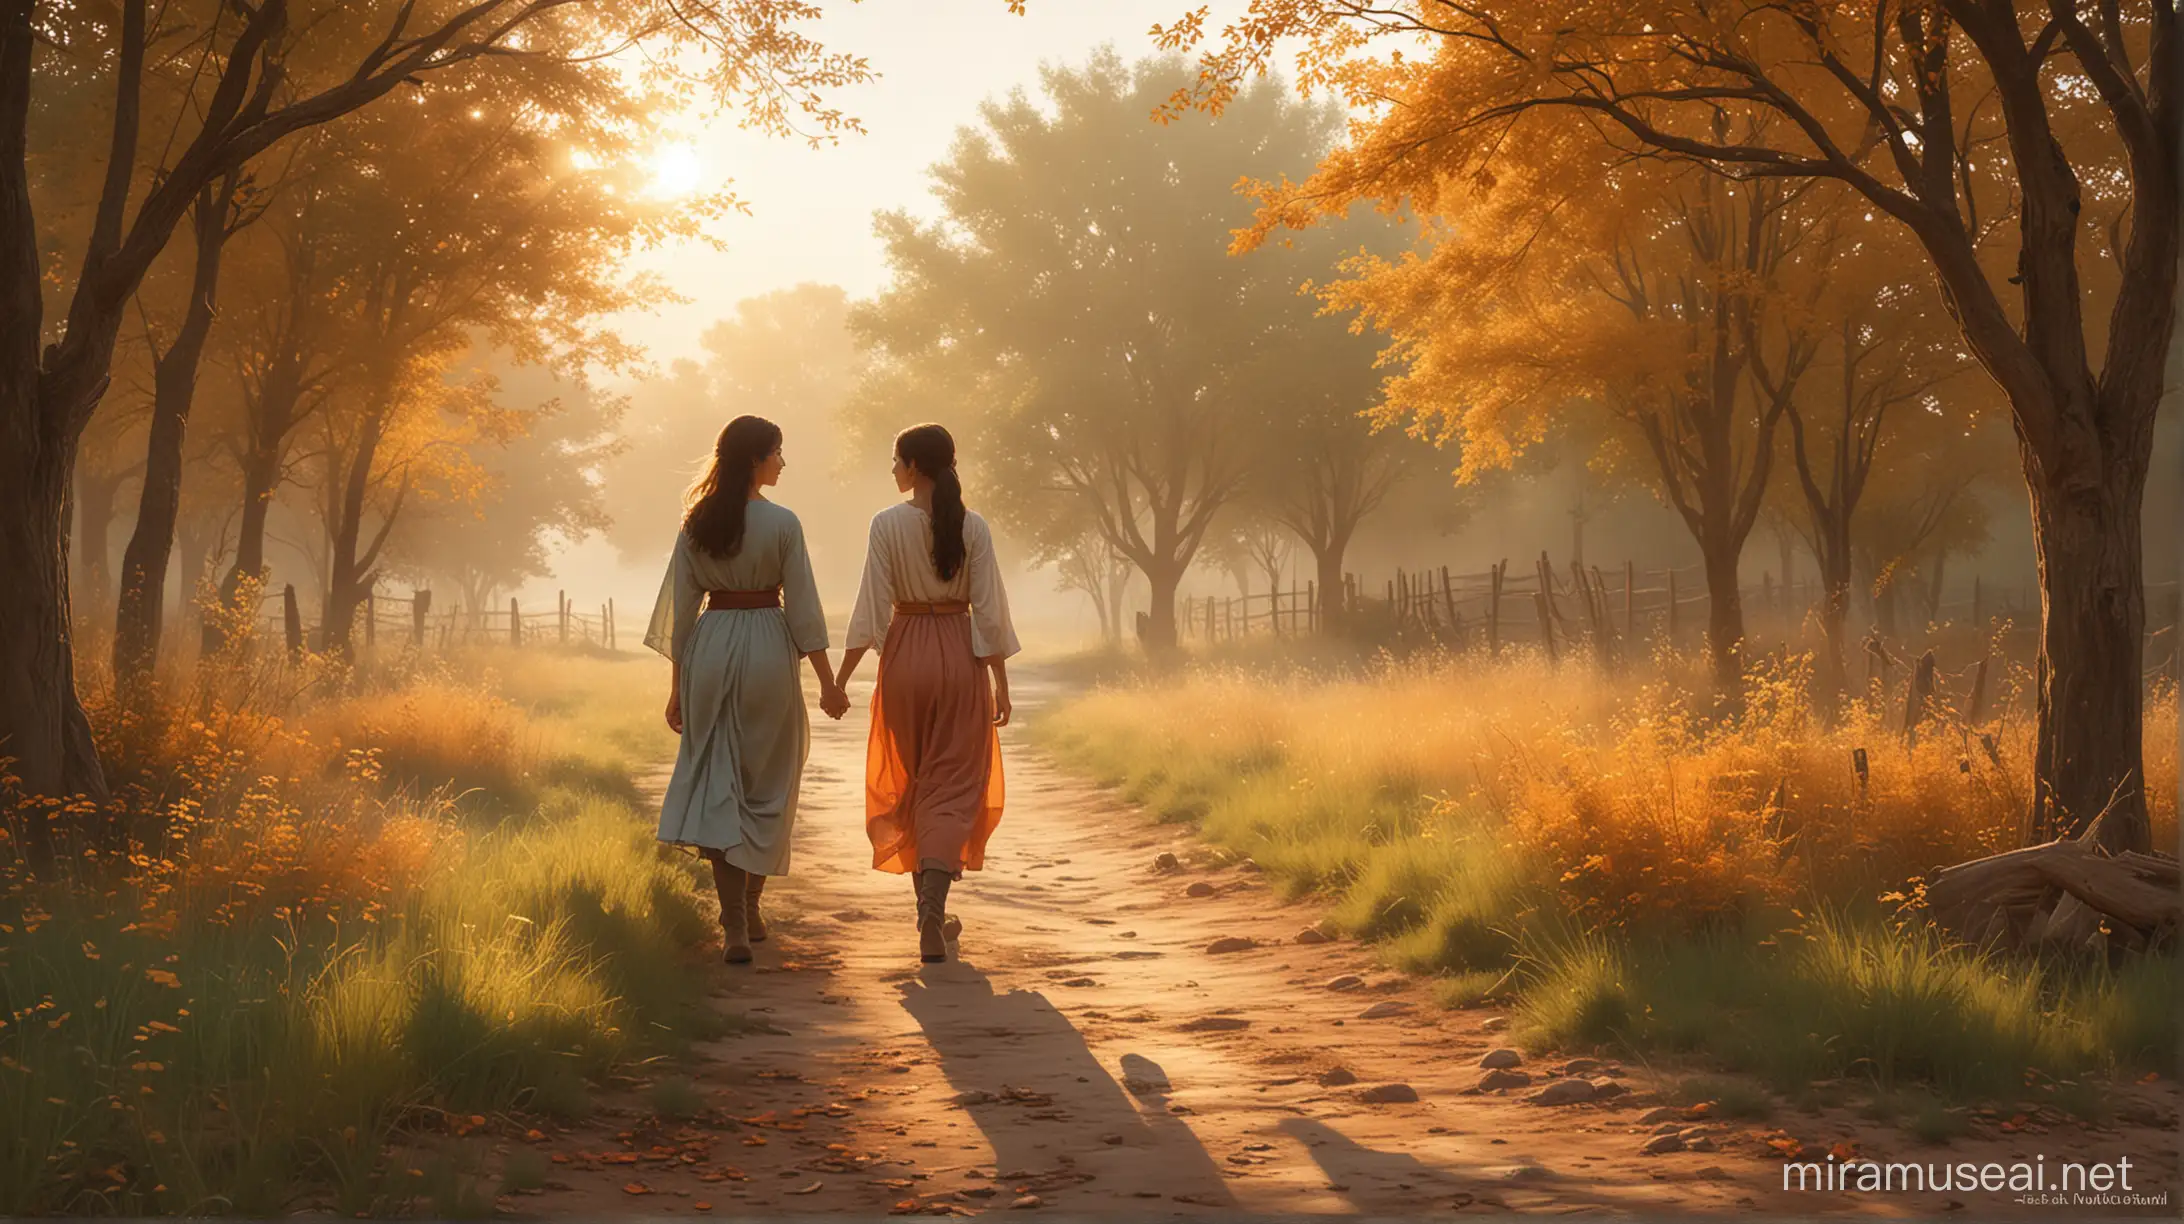 /imagine prompt: Karo and the girl walk back to the village as the sun sets, casting a warm golden glow over the rustic
landscape. The gentle breeze rustles the leaves of the trees, creating a serene atmosphere. Karo's protective stance
beside the girl exudes a sense of companionship and trust. The image is rendered with soft, pastel colors and a touch of
impressionistic style, capturing the tranquility of the moment. The mood is peaceful and heartwarming, symbolizing the
beginning of a beautiful friendship --ar 16:9 --v 5 --q 2